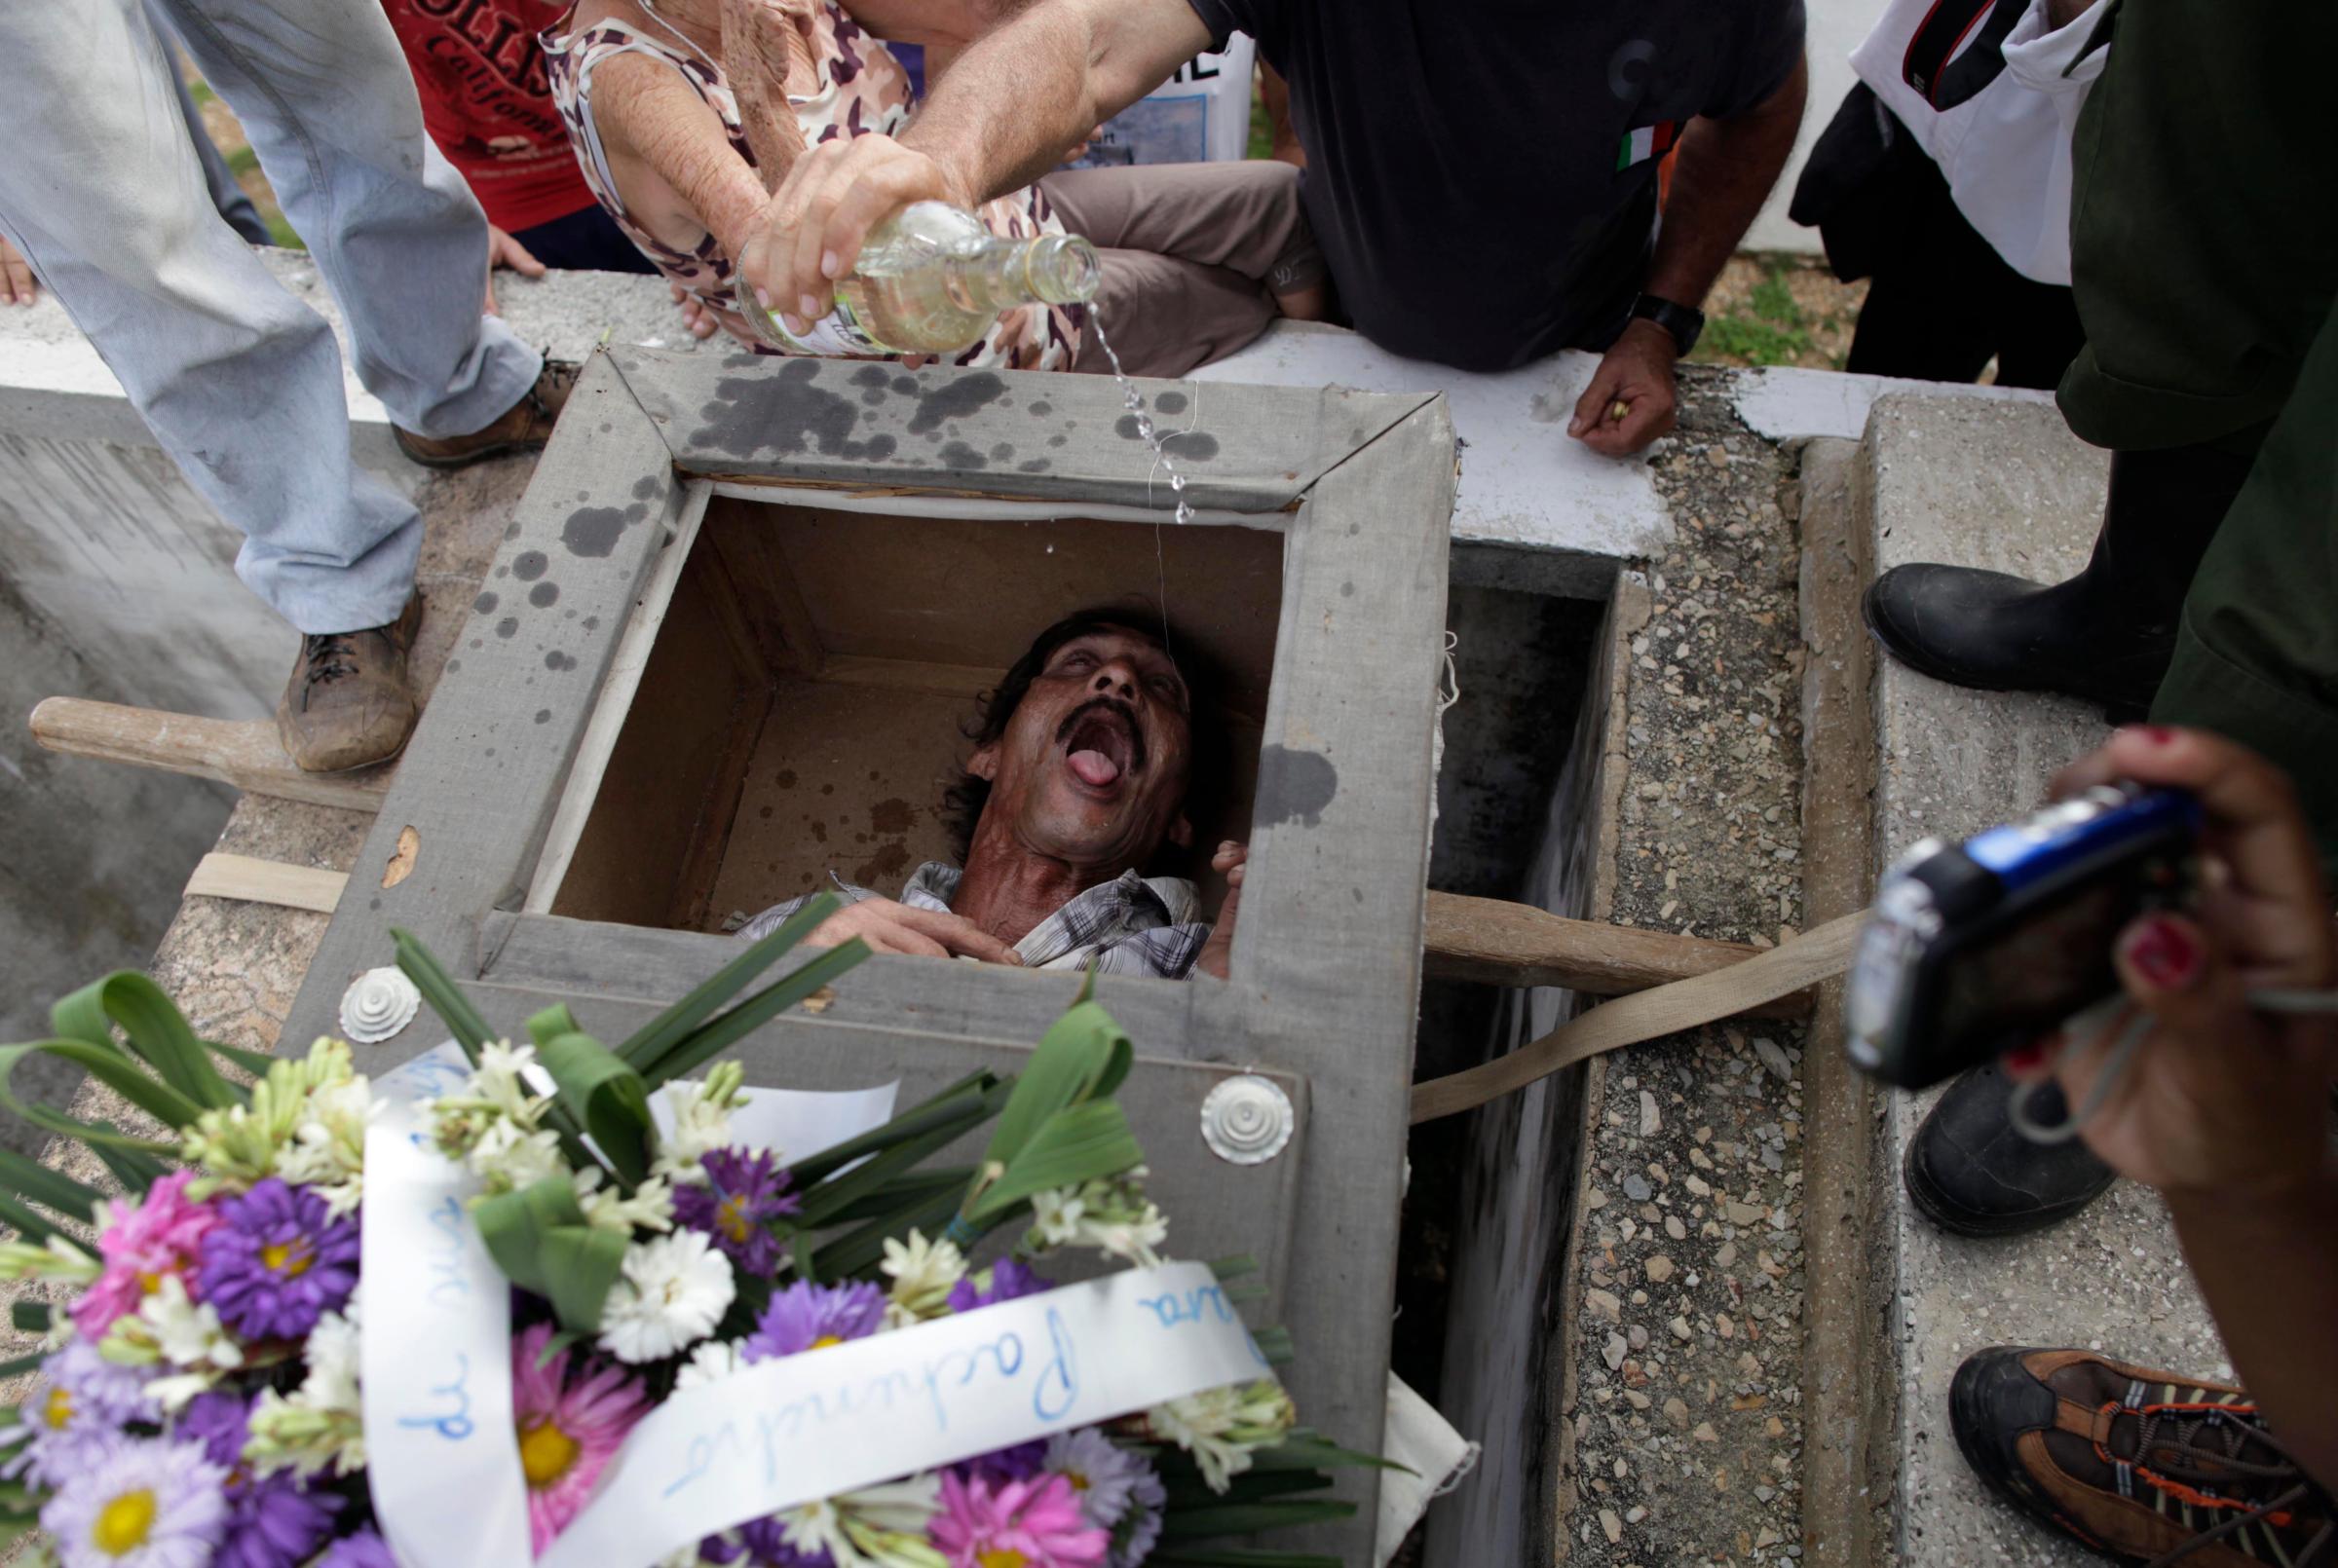 Divaldo Aguiar, who plays the part of Pachencho, lies inside a mock coffin as villagers splash rum into Aguiar's mouth during the Burial of Pachencho celebration at a cemetery in Santiago de Las Vegas, Cuba, Feb. 5.